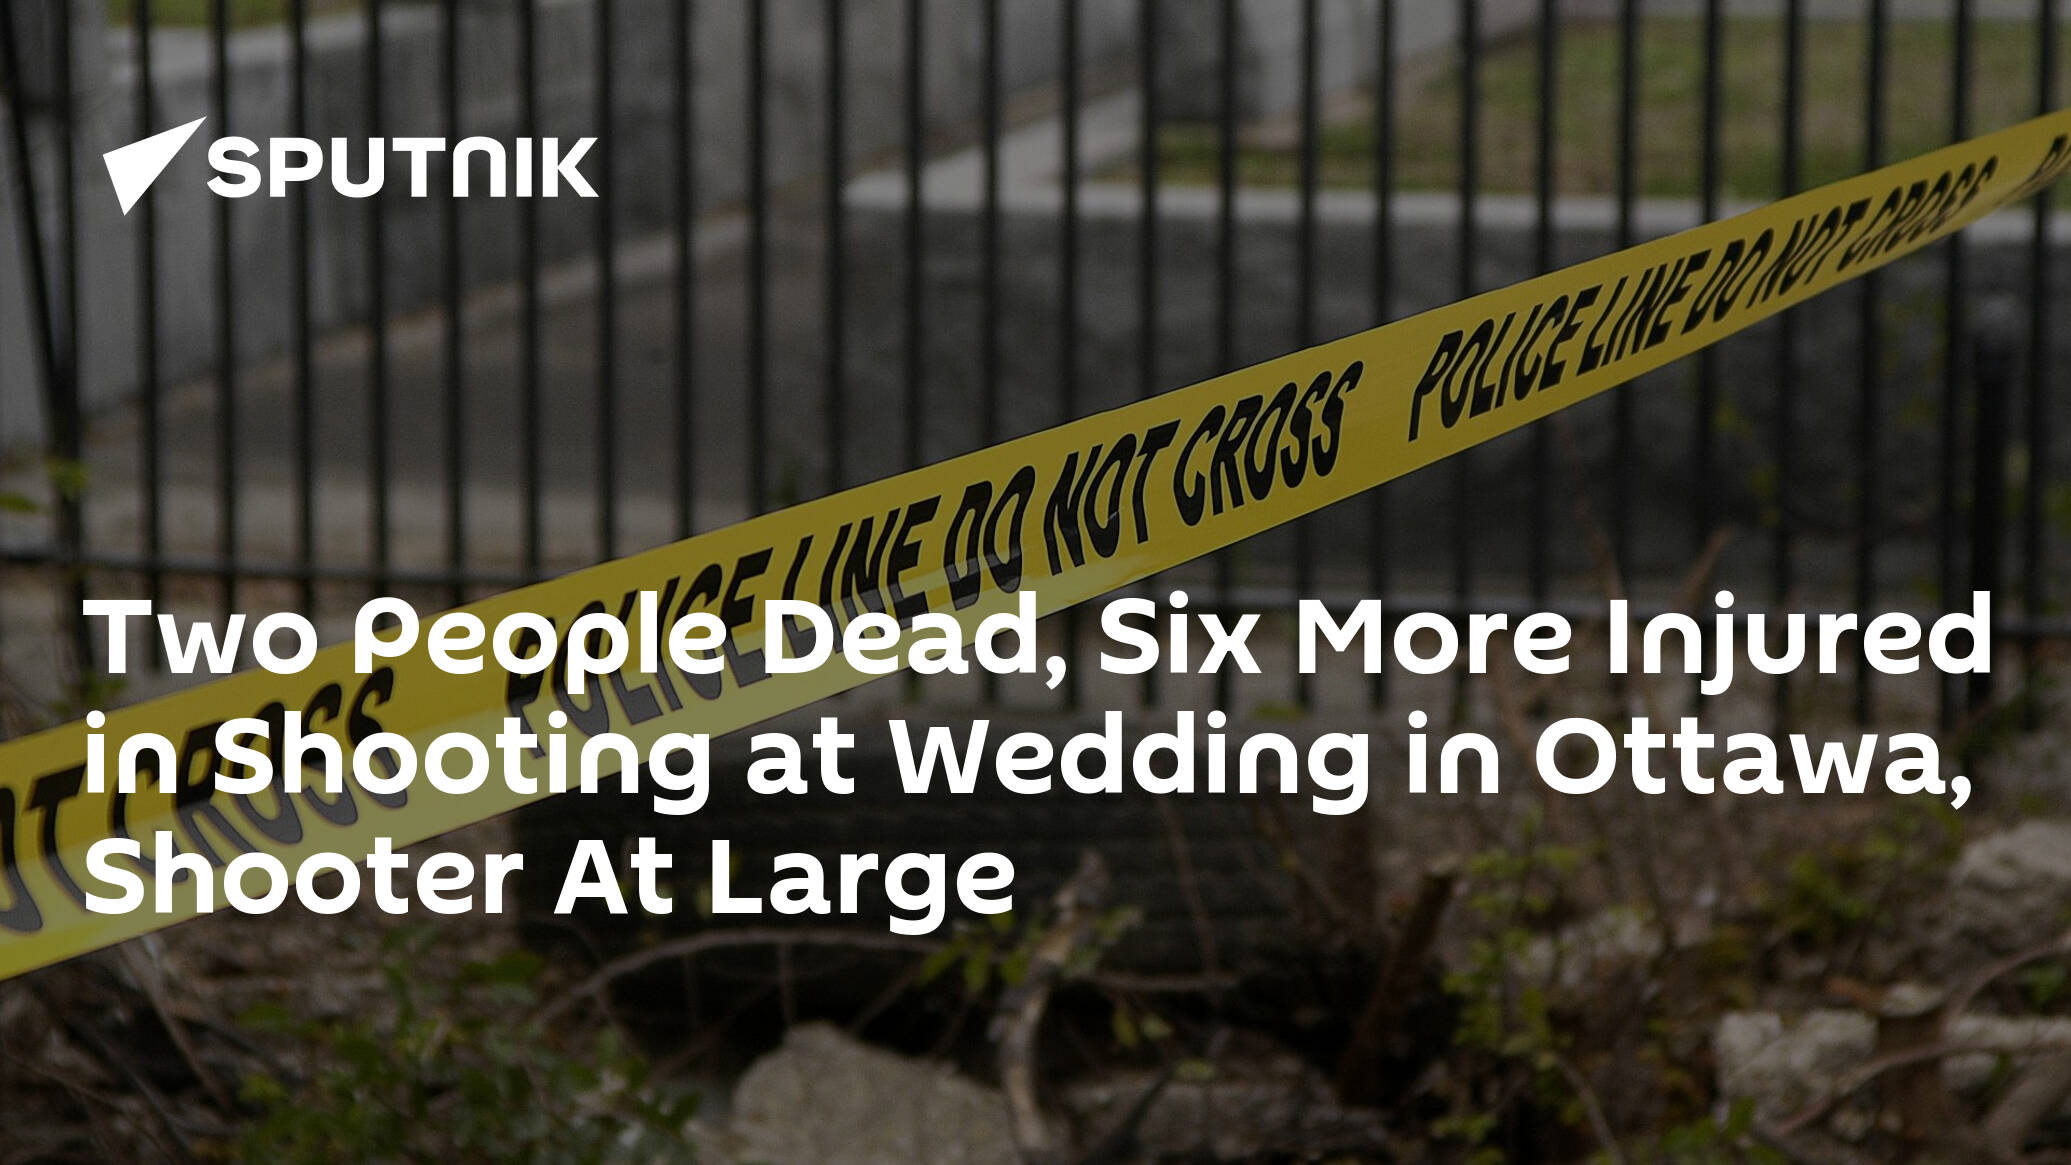 Two People Dead, Six More Injured in Shooting at Wedding in Ottawa, Shooter At Large